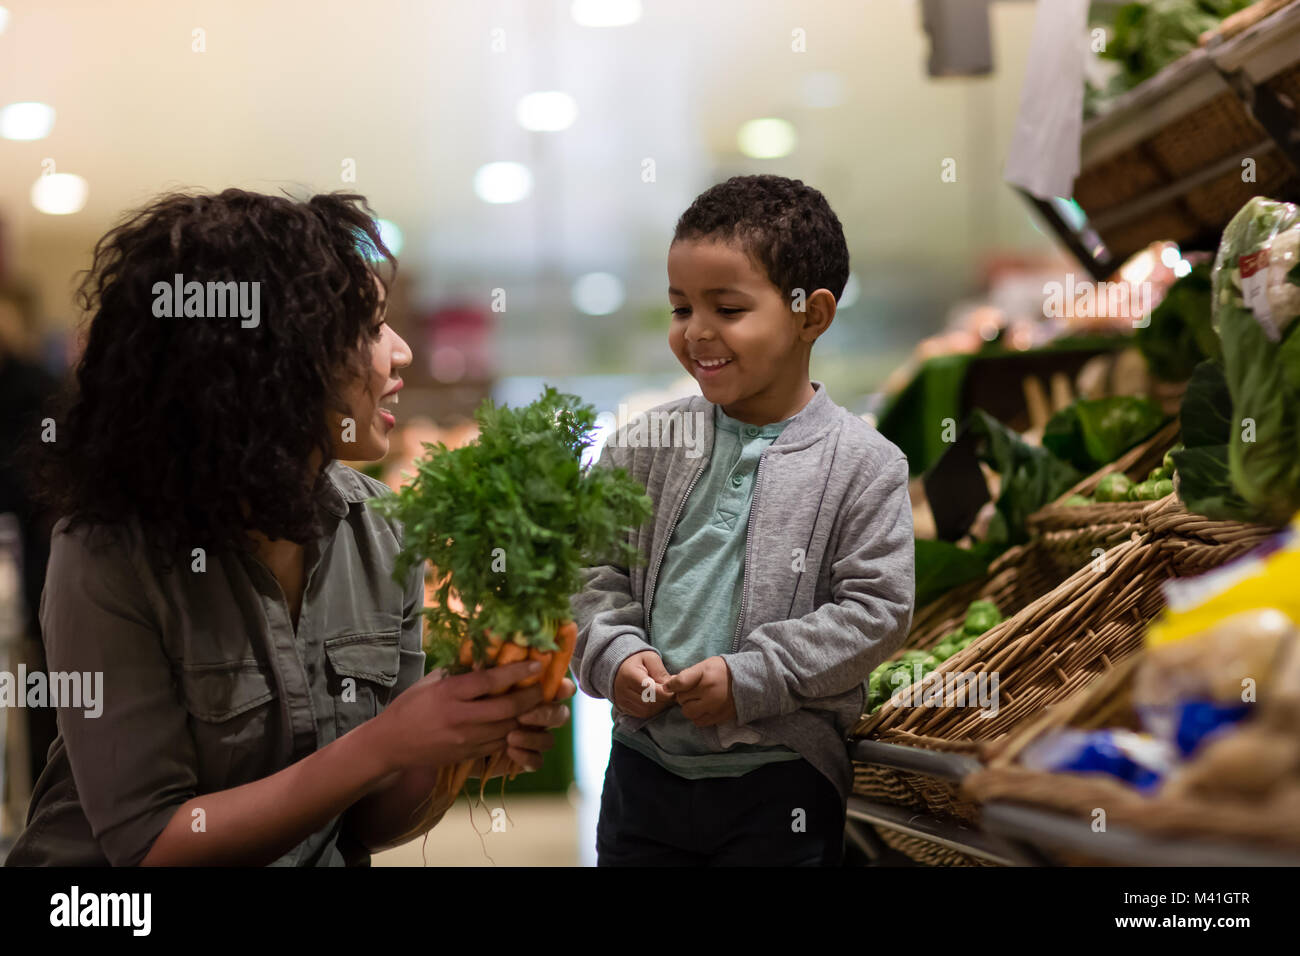 Boy picking carrots in grocery store Banque D'Images